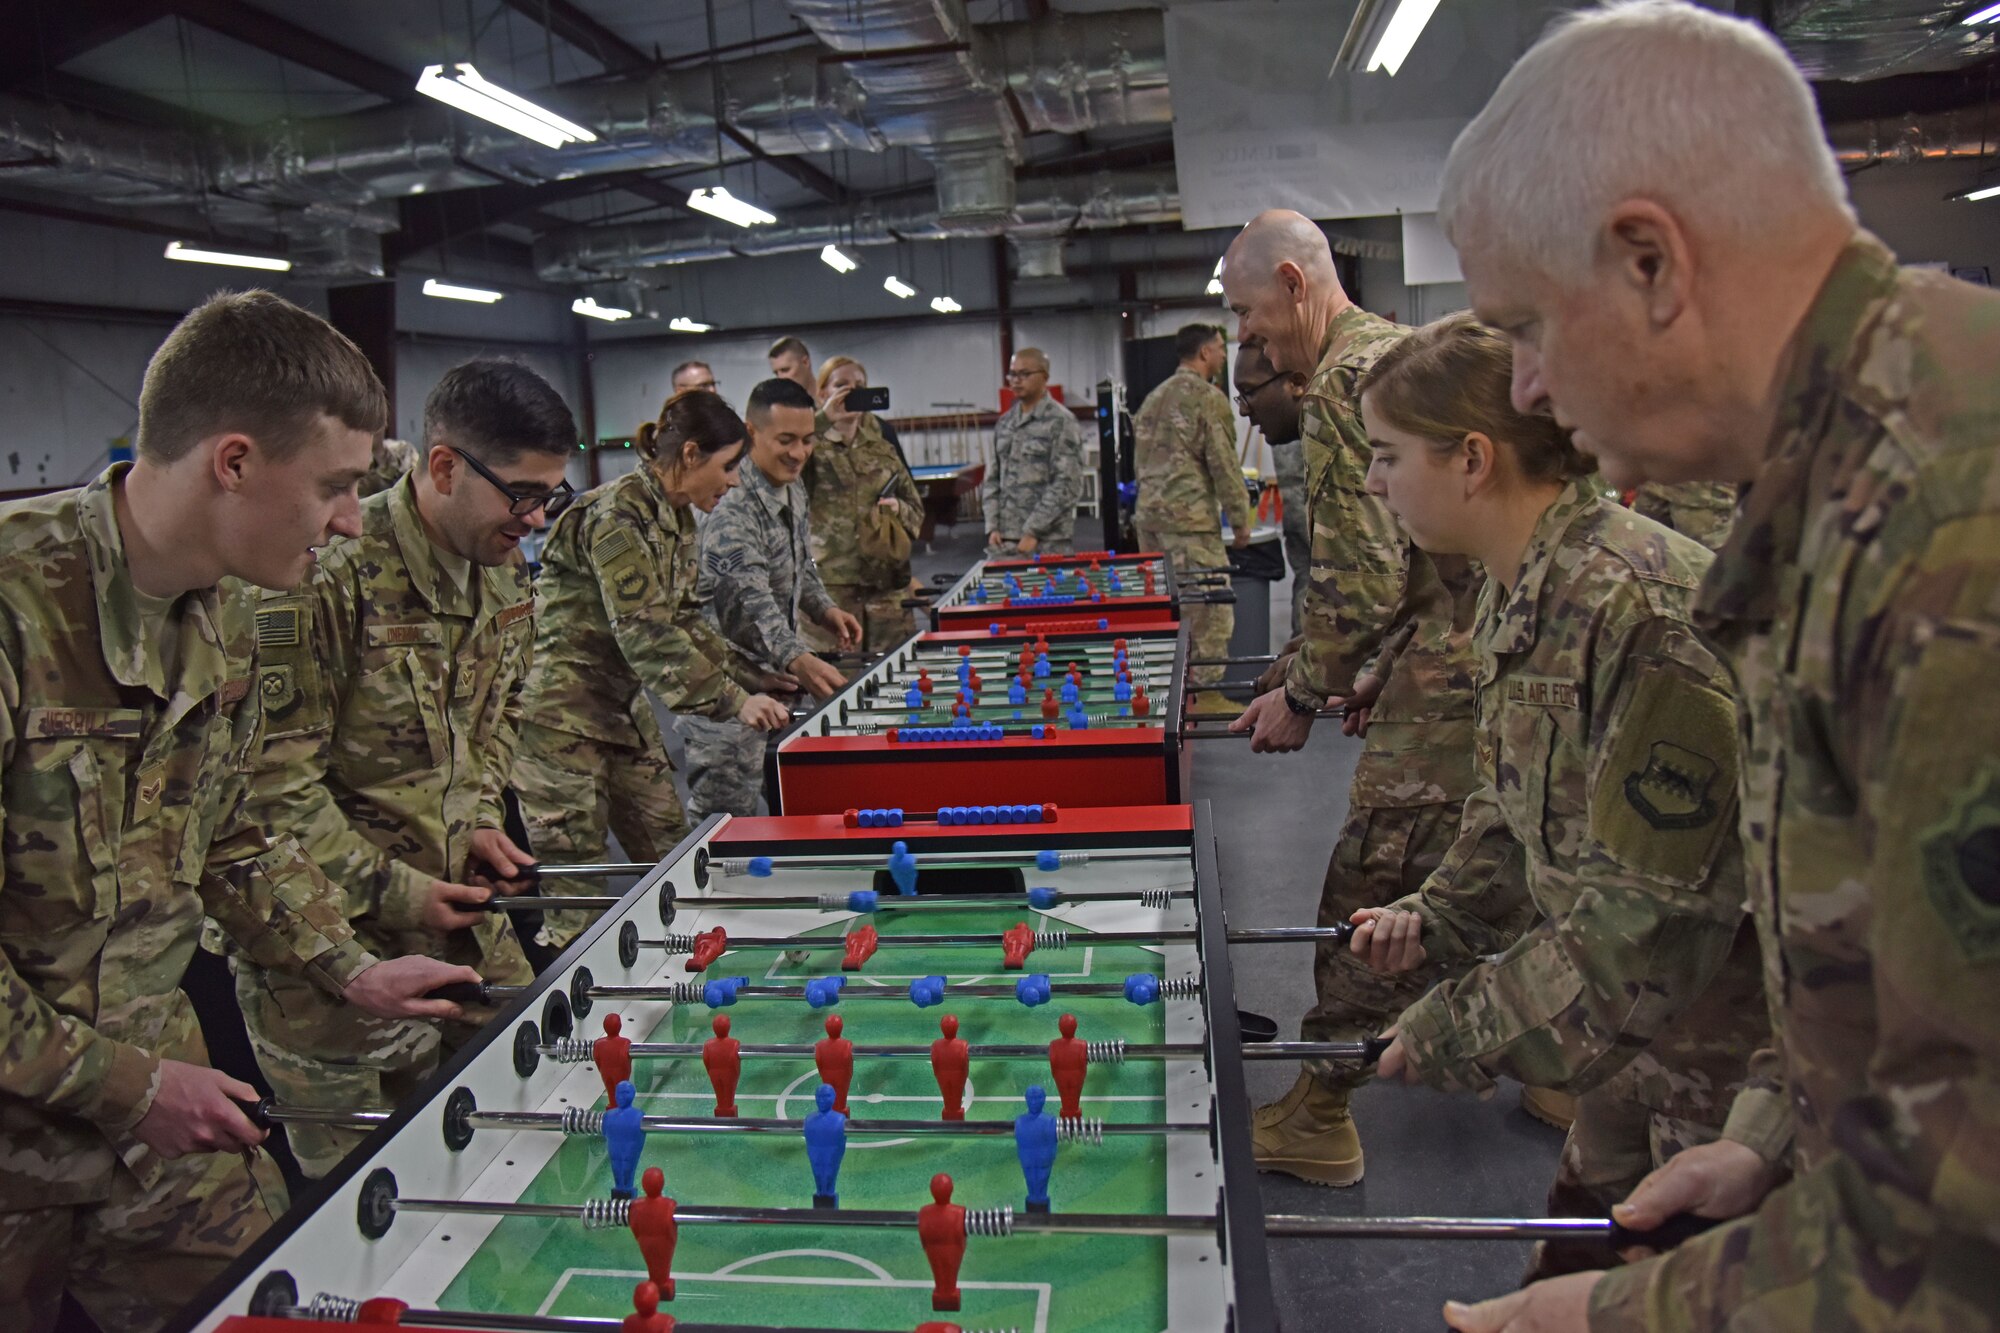 U.S. Air Force Lt. Gen. Scott Rice, Air National Guard director, plays foosball with 407th Expeditionary Force Support Squadron personnel at the 407th Air Expeditionary Group in Southwest Asia, Dec. 25, 2017. The visit gave Rice and Anderson and opportunity to spend Christmas with deployed Airmen. (U.S. Air Force photo by Staff Sgt. Joshua Edwards/Released)